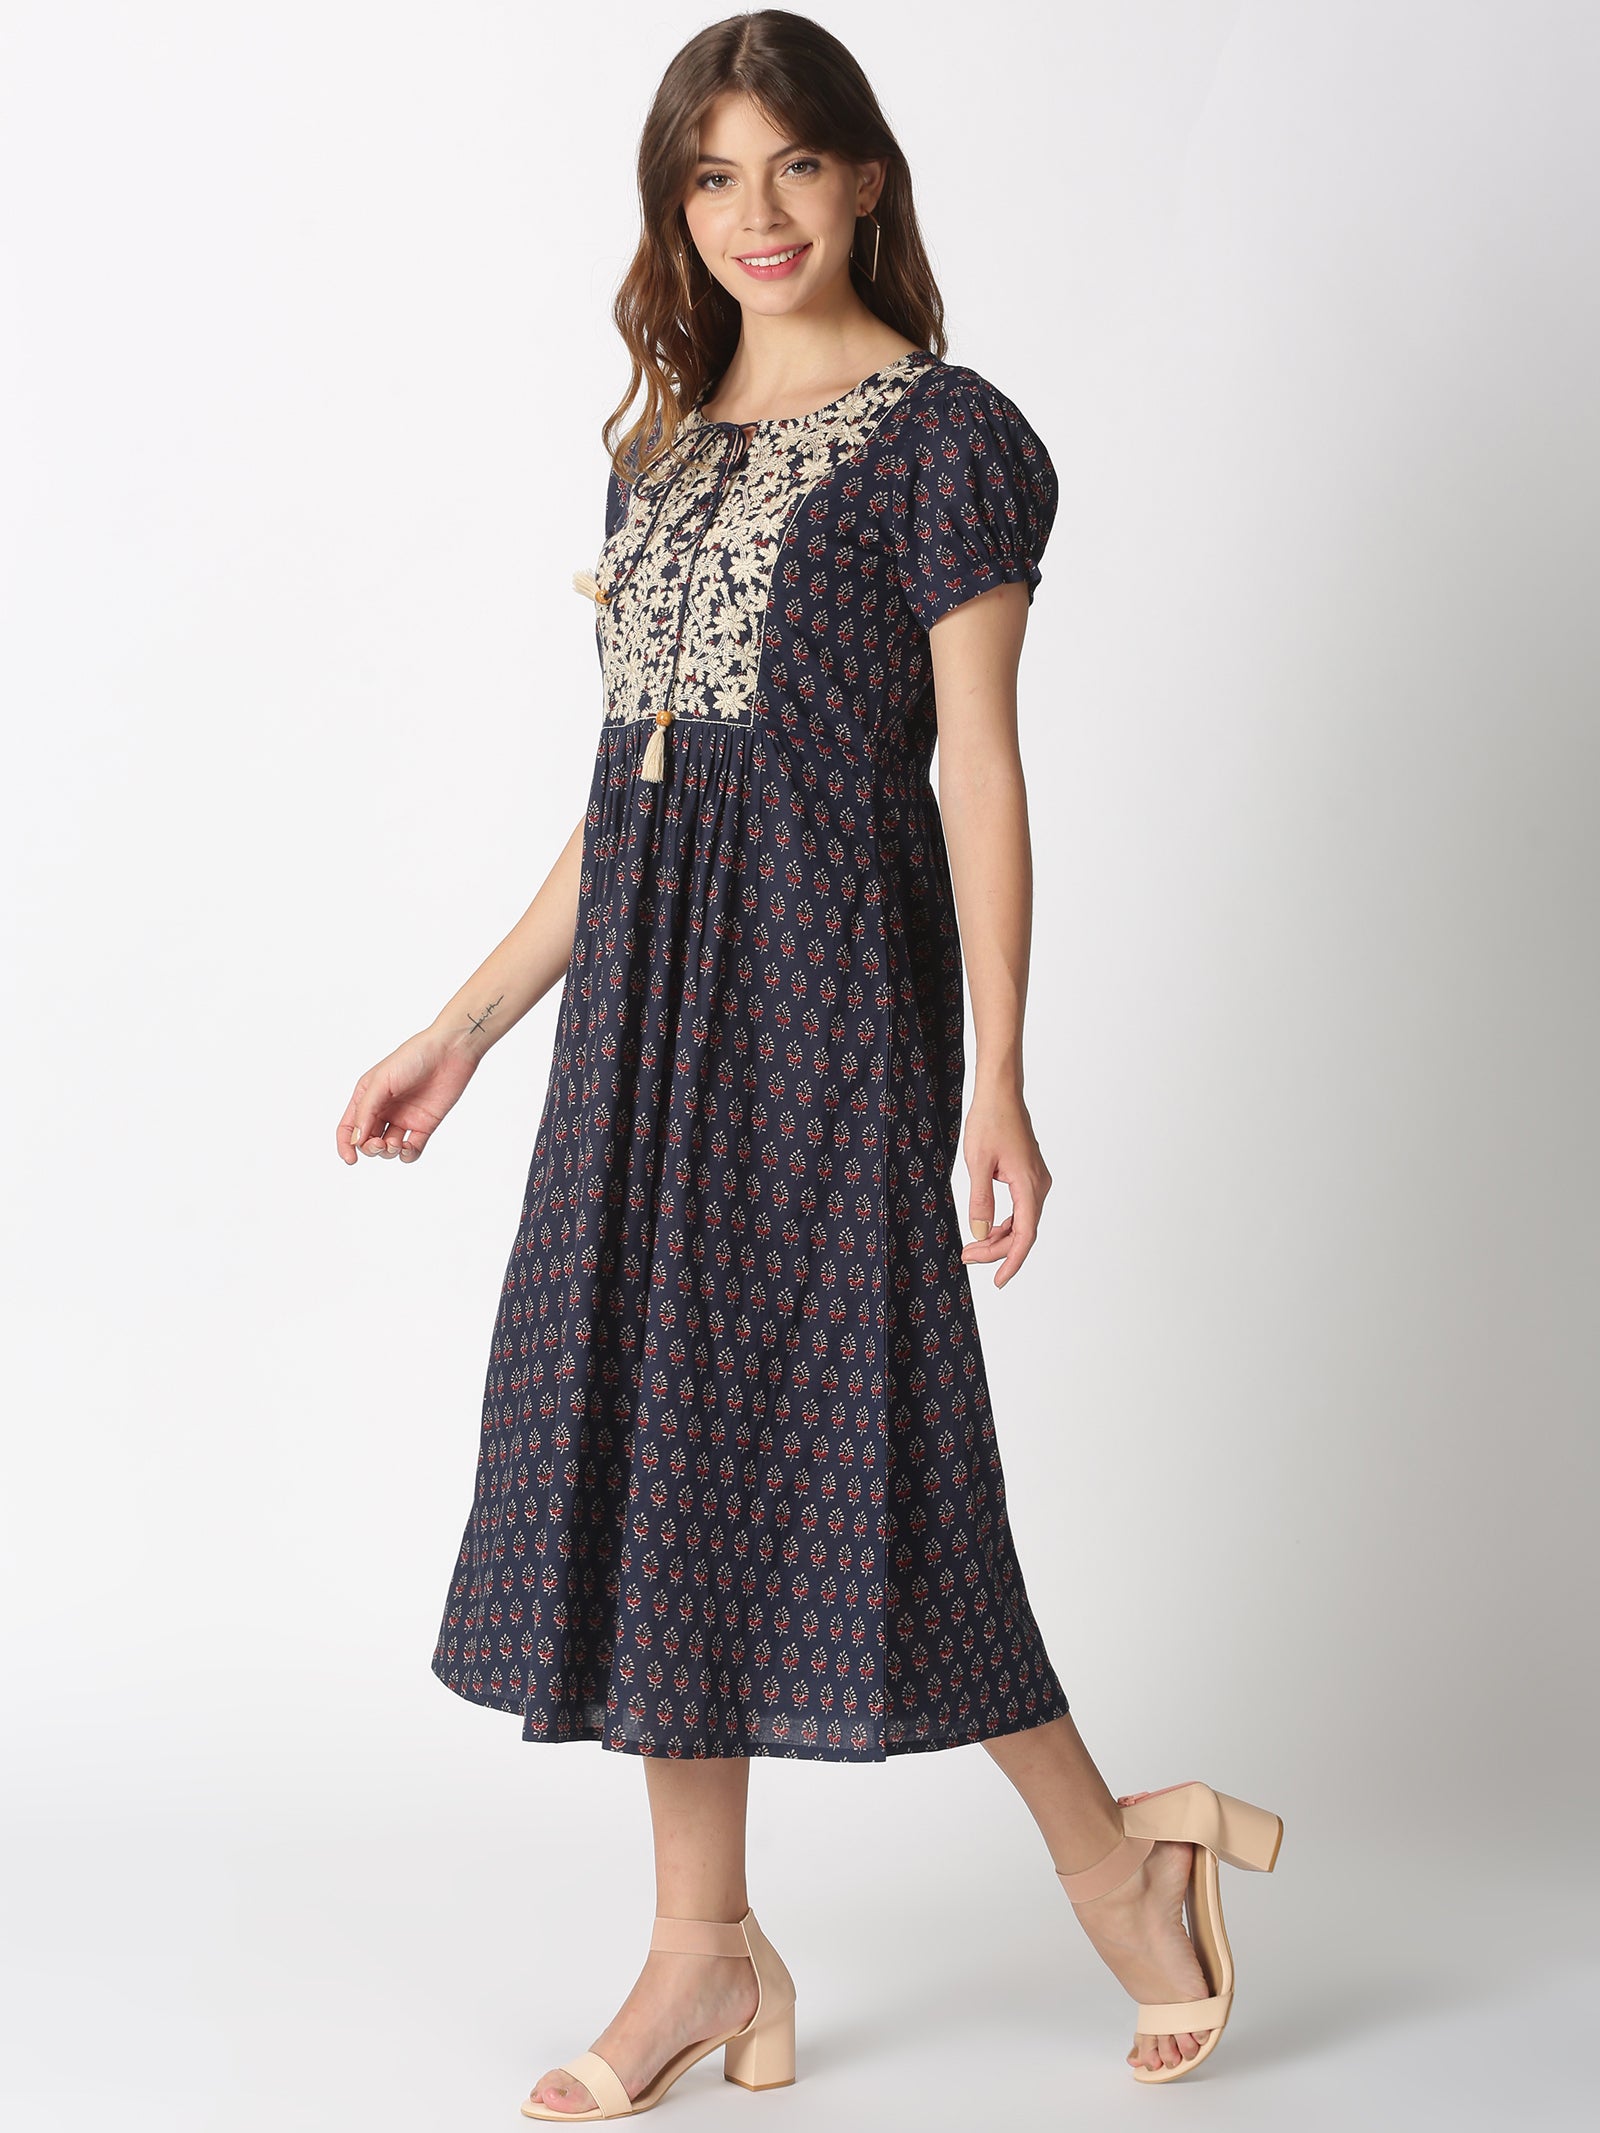 Navy Ethnic Motifs Printed Dress with Floral Embroidered Yoke